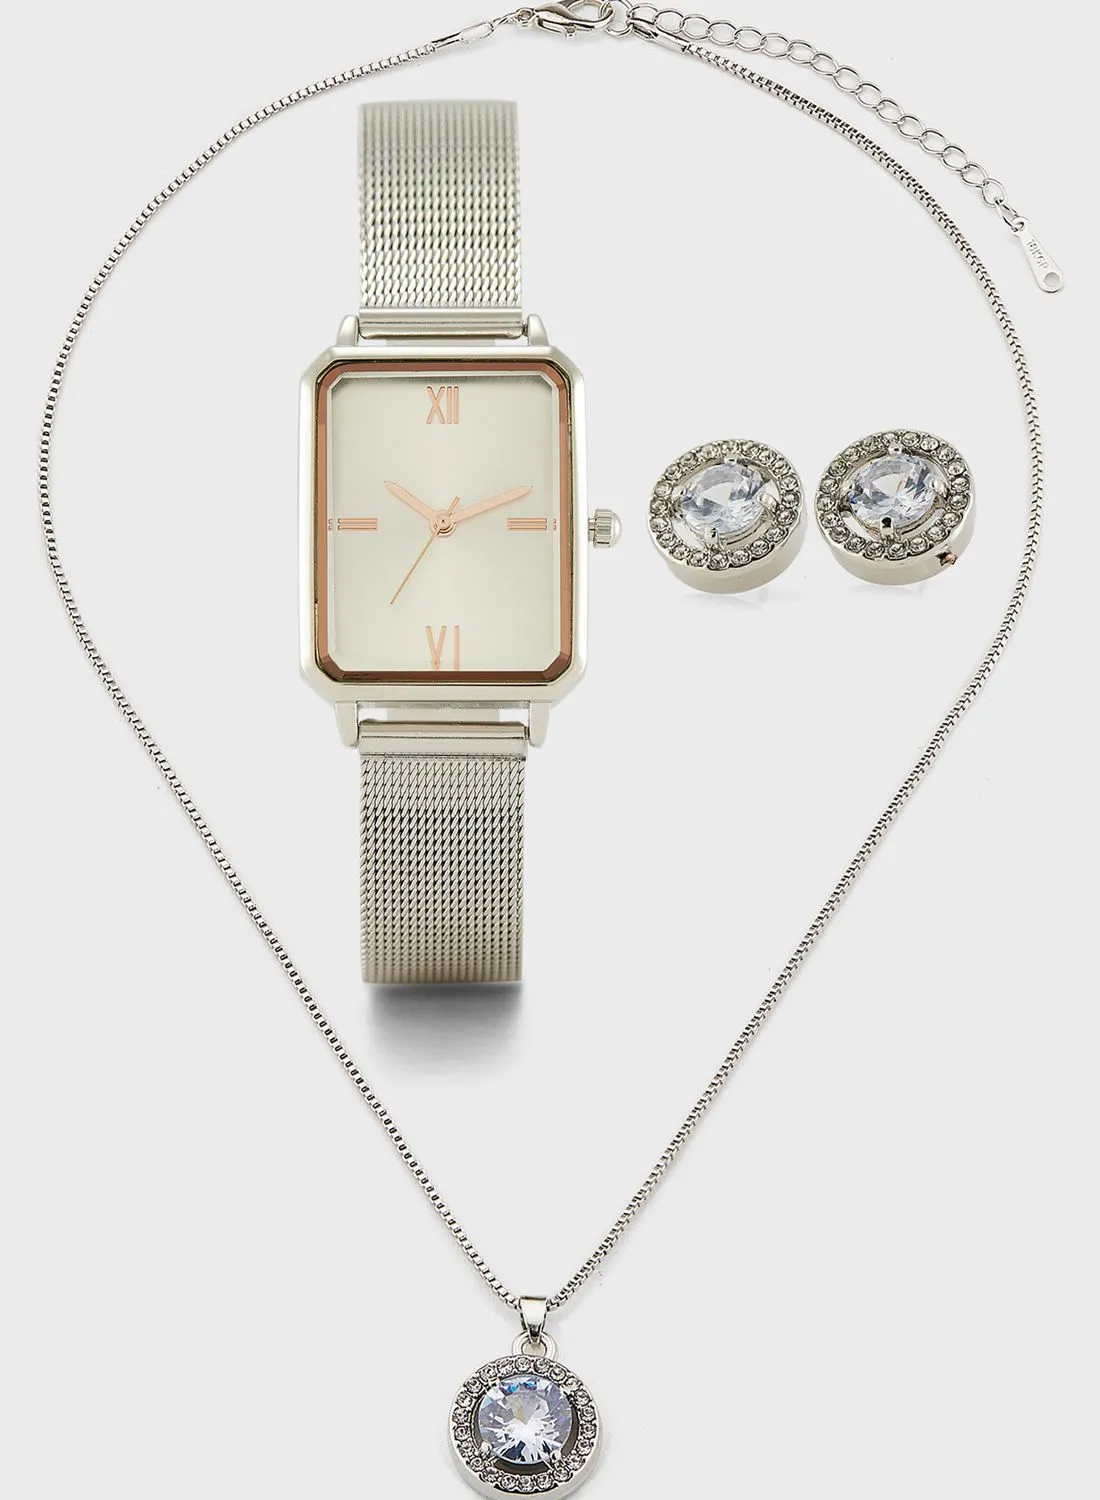 ELLA Rectangular Chain Strap Watch, Earrings And Necklace Gift Set